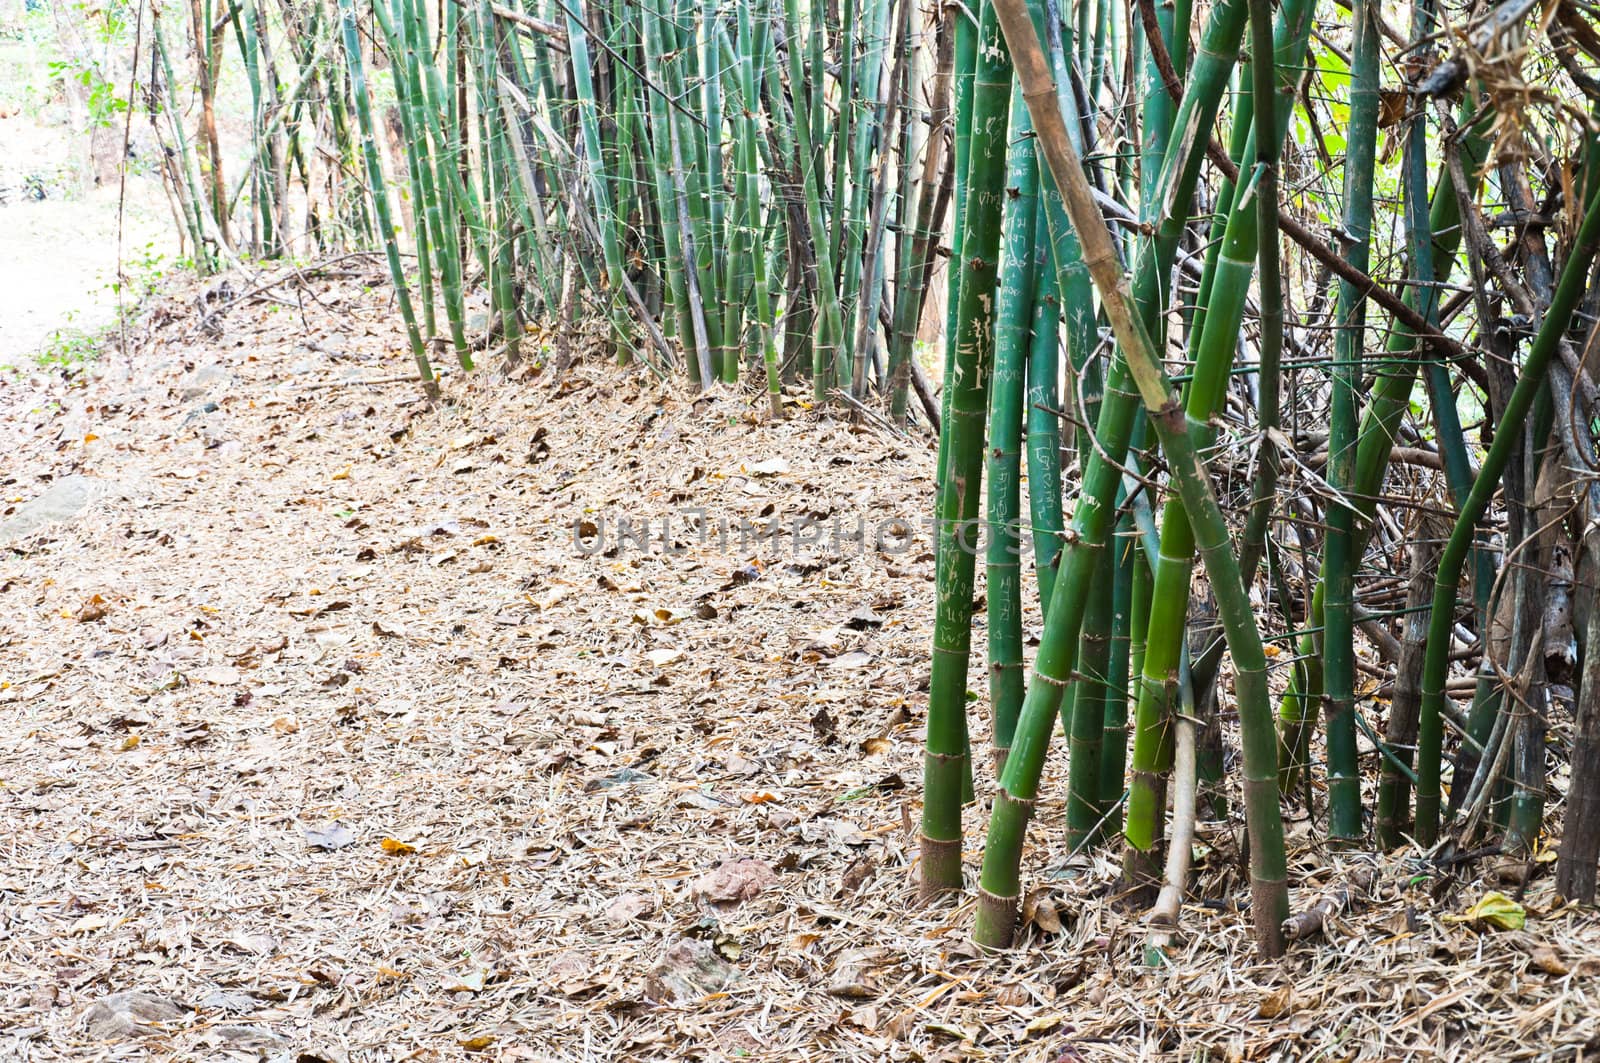 Bamboo on the road by sayhmog